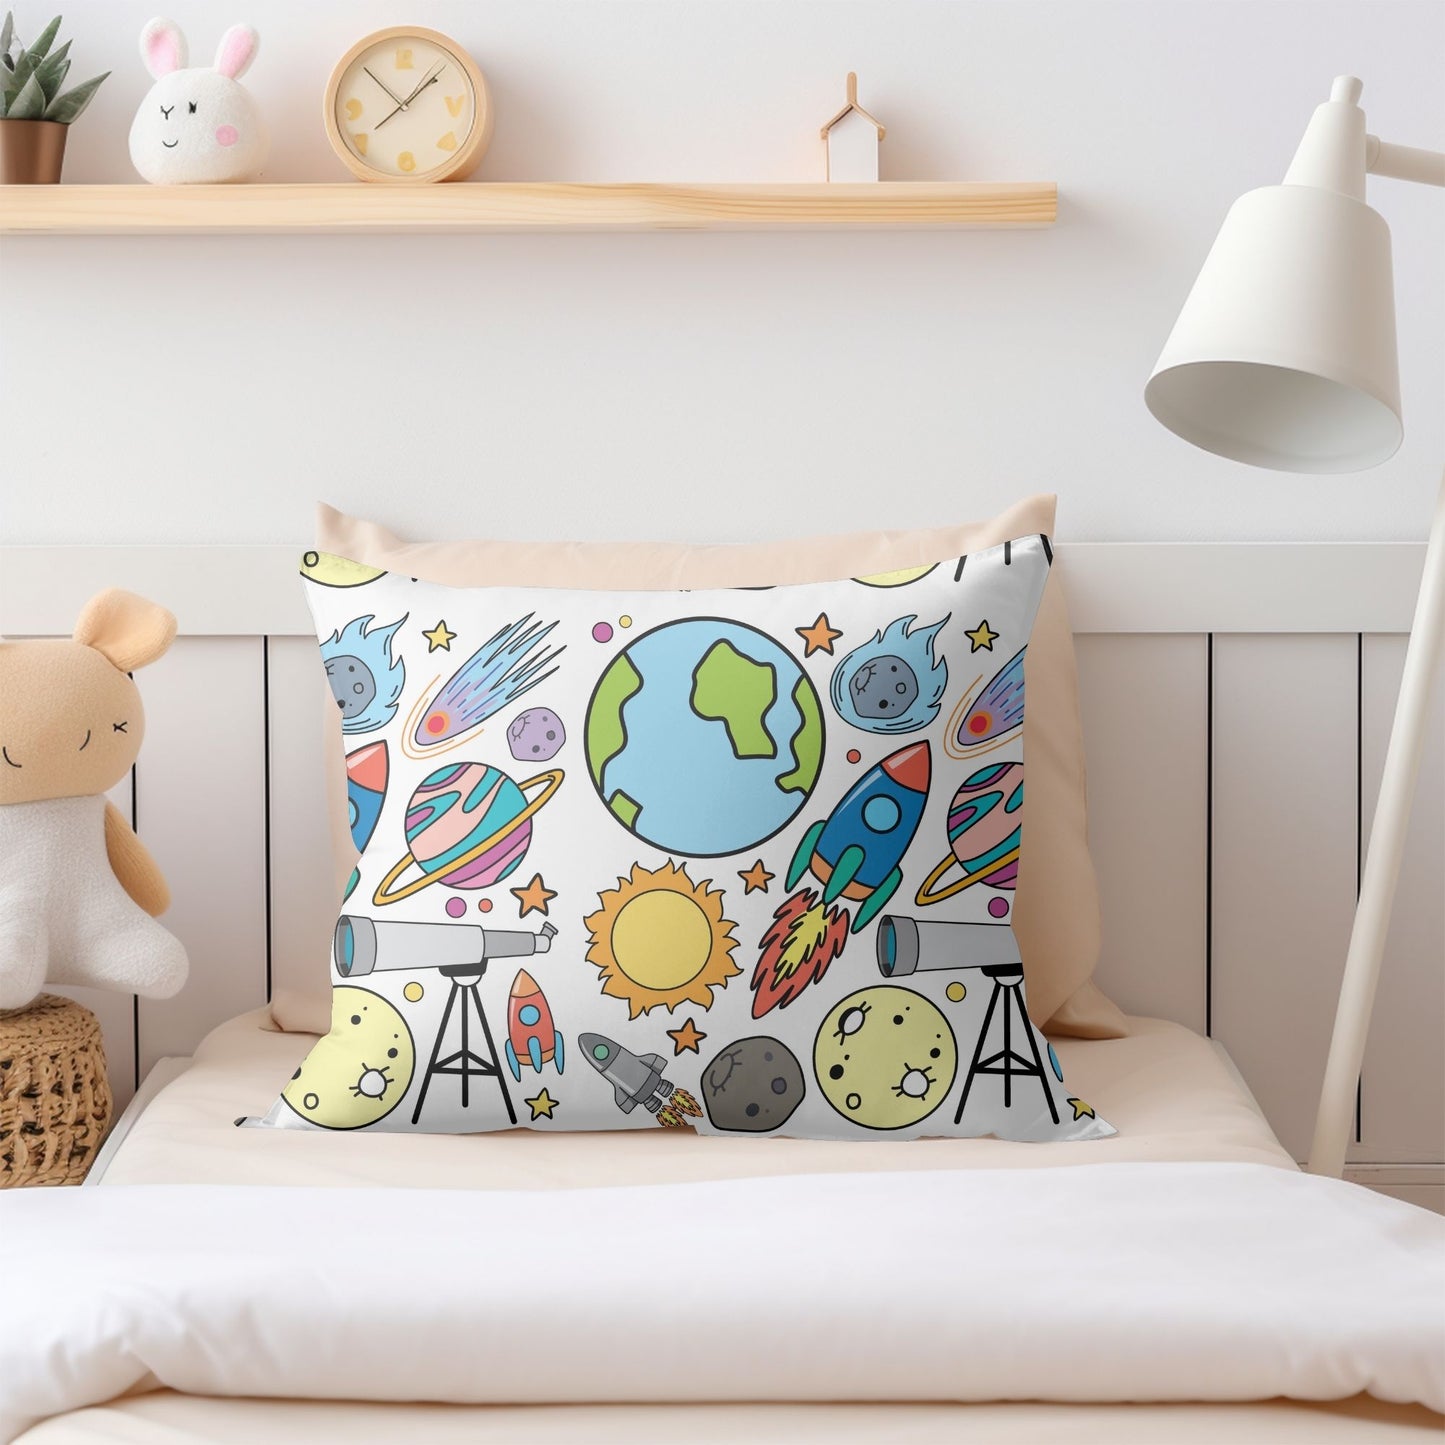 Fun-filled pillow featuring colorful skyrockets for nursery ambiance.